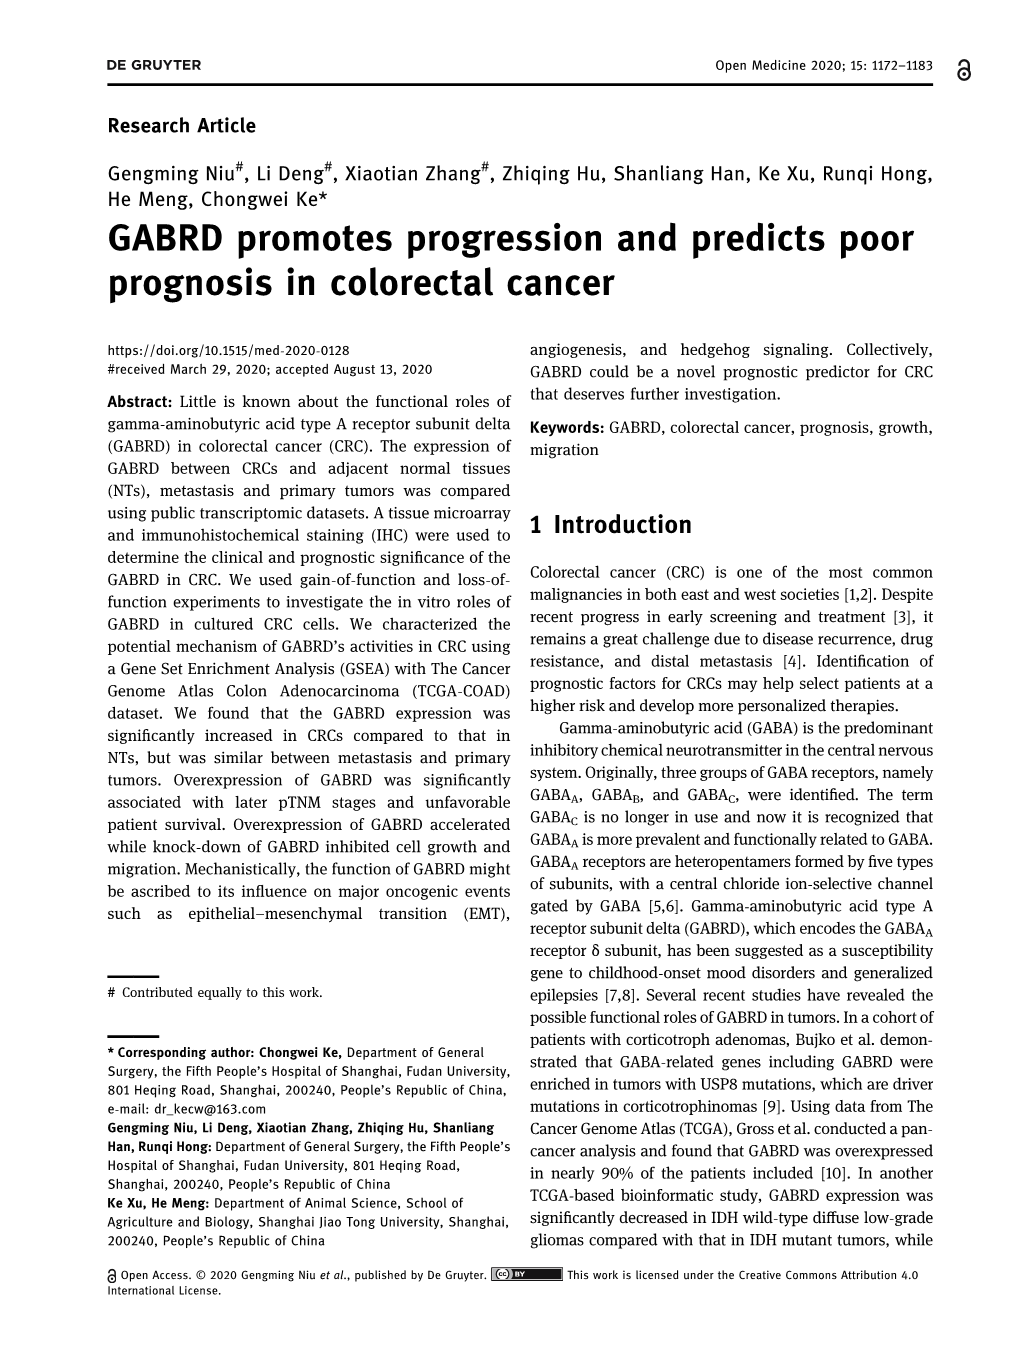 GABRD Promotes Progression and Predicts Poor Prognosis in Colorectal Cancer Angiogenesis, and Hedgehog Signaling